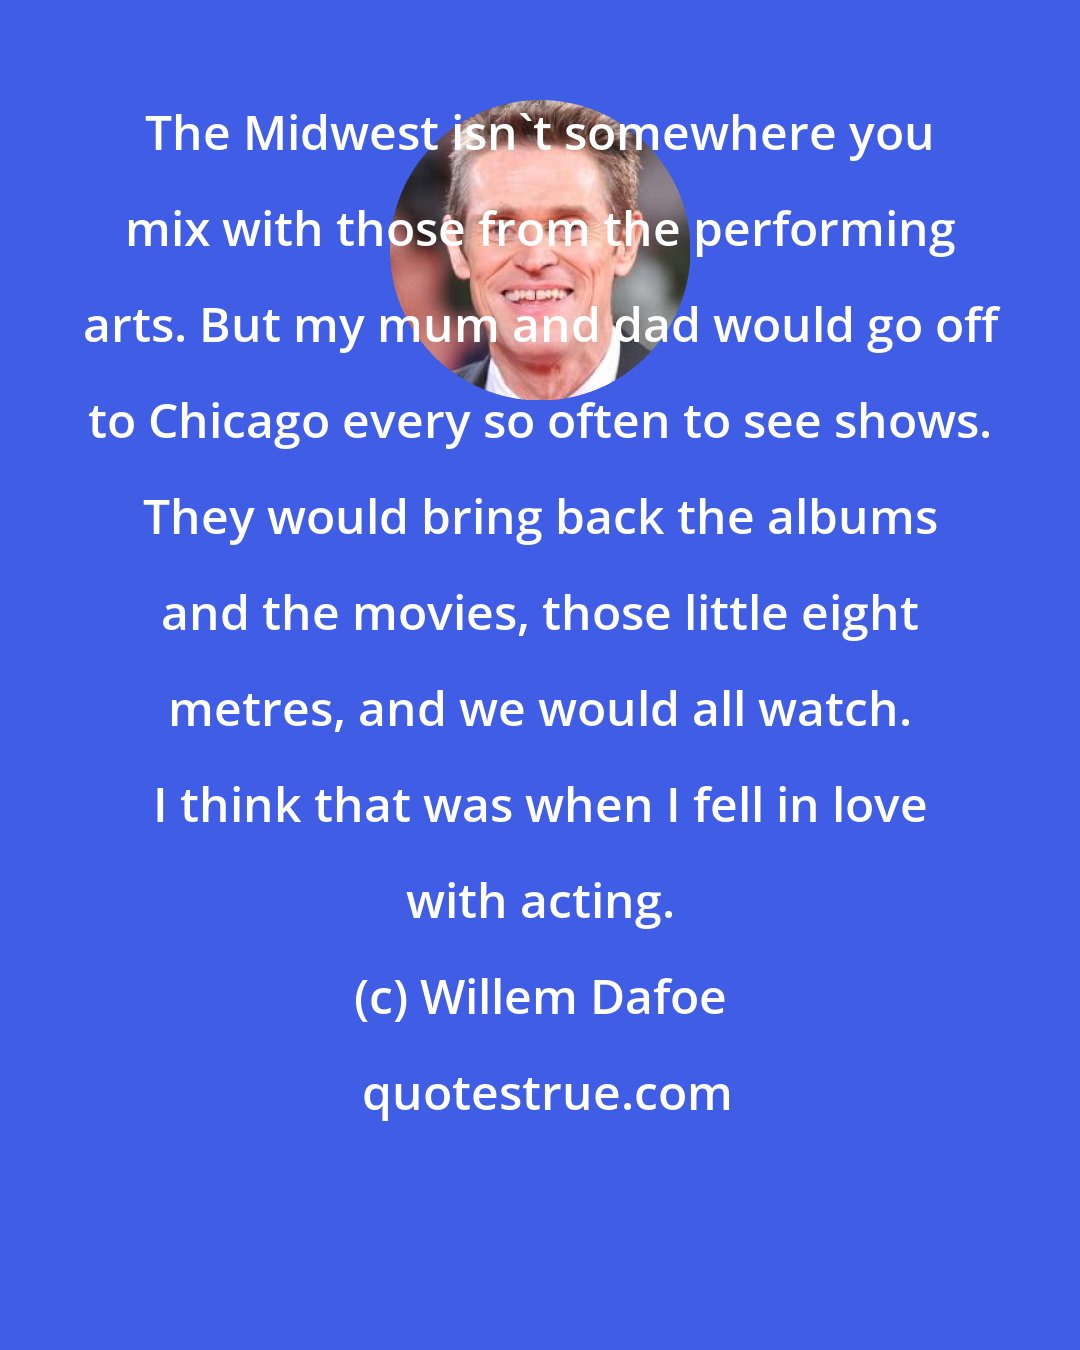 Willem Dafoe: The Midwest isn't somewhere you mix with those from the performing arts. But my mum and dad would go off to Chicago every so often to see shows. They would bring back the albums and the movies, those little eight metres, and we would all watch. I think that was when I fell in love with acting.